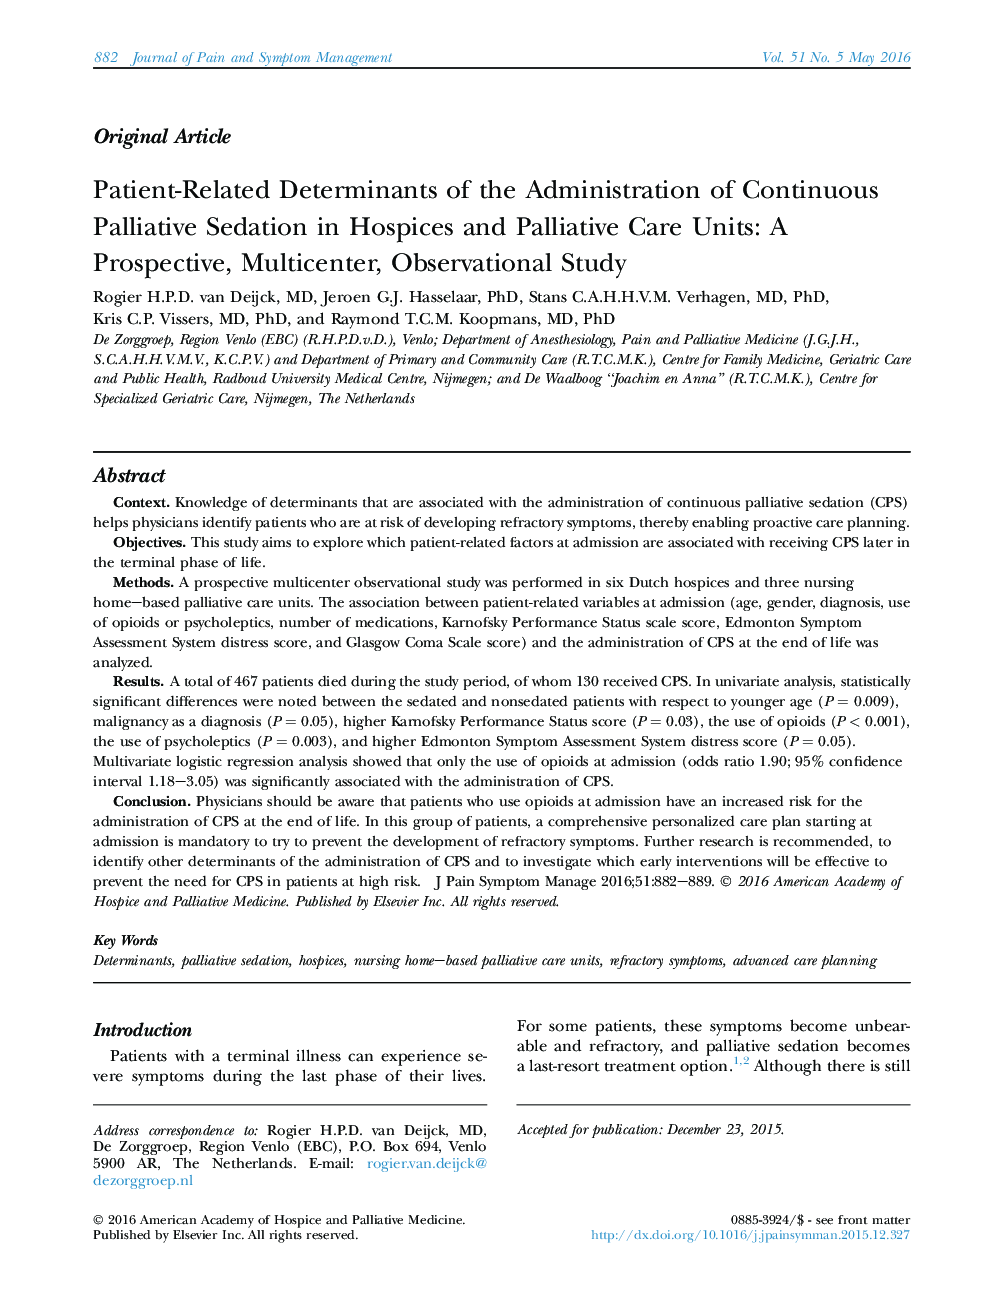 Original ArticlePatient-Related Determinants of the Administration of Continuous Palliative Sedation in Hospices and Palliative Care Units: A Prospective, Multicenter, Observational Study